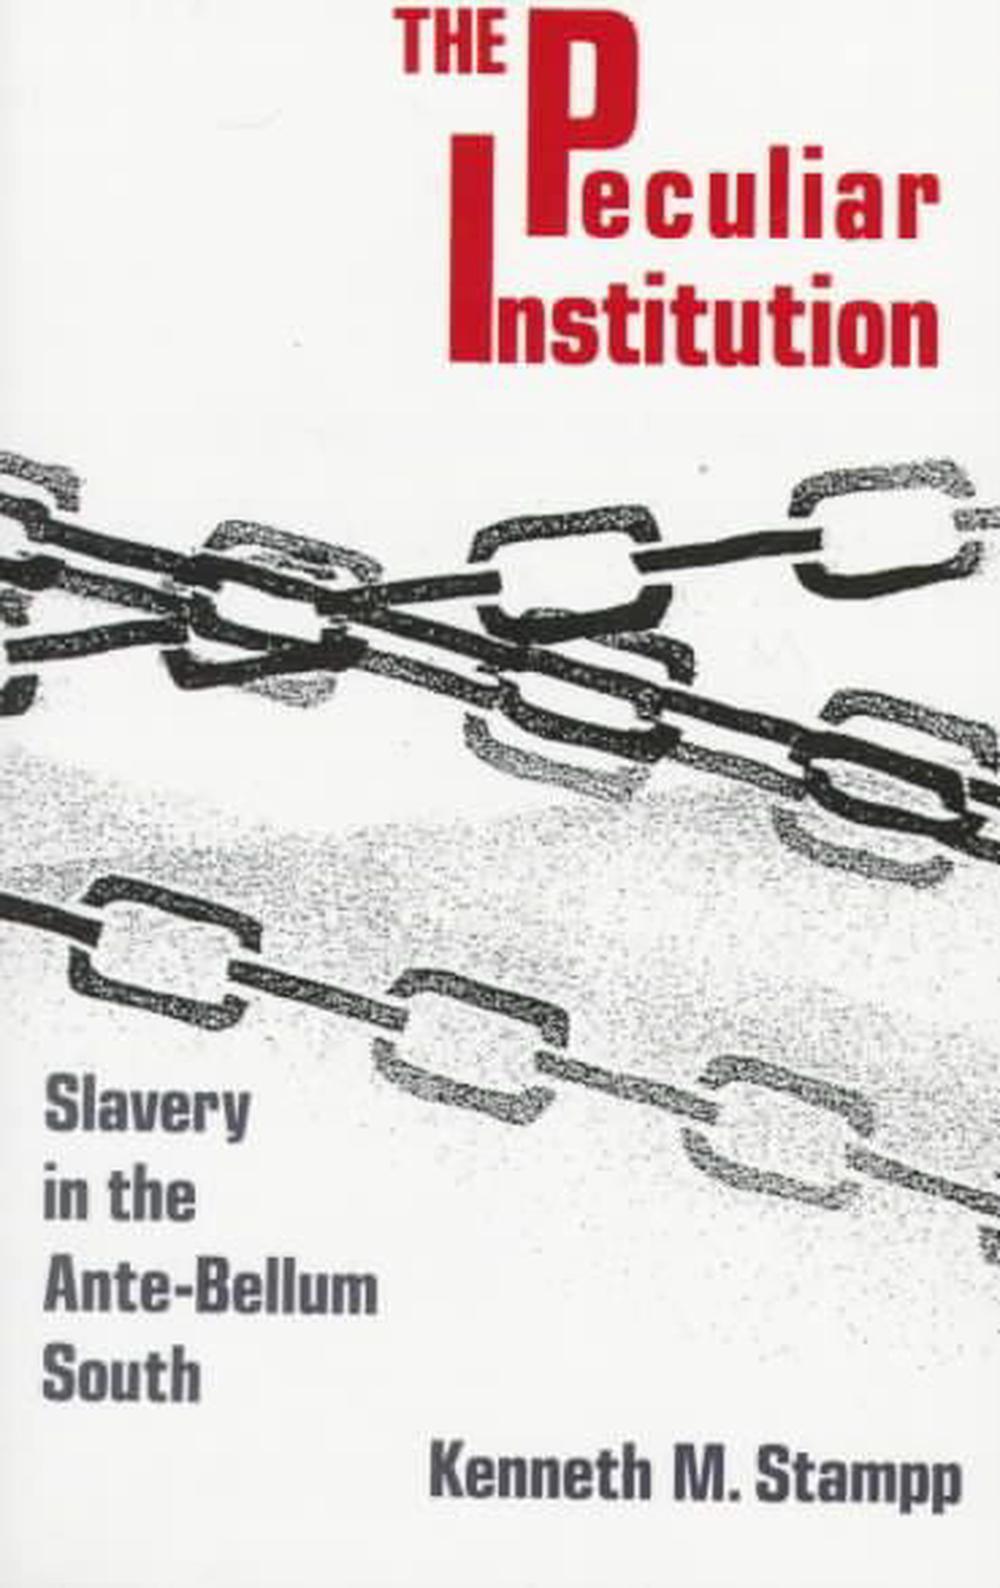 "The Peculiar Institution: Slavery In The Ante-Bellum South" by Kenneth M. Stampp